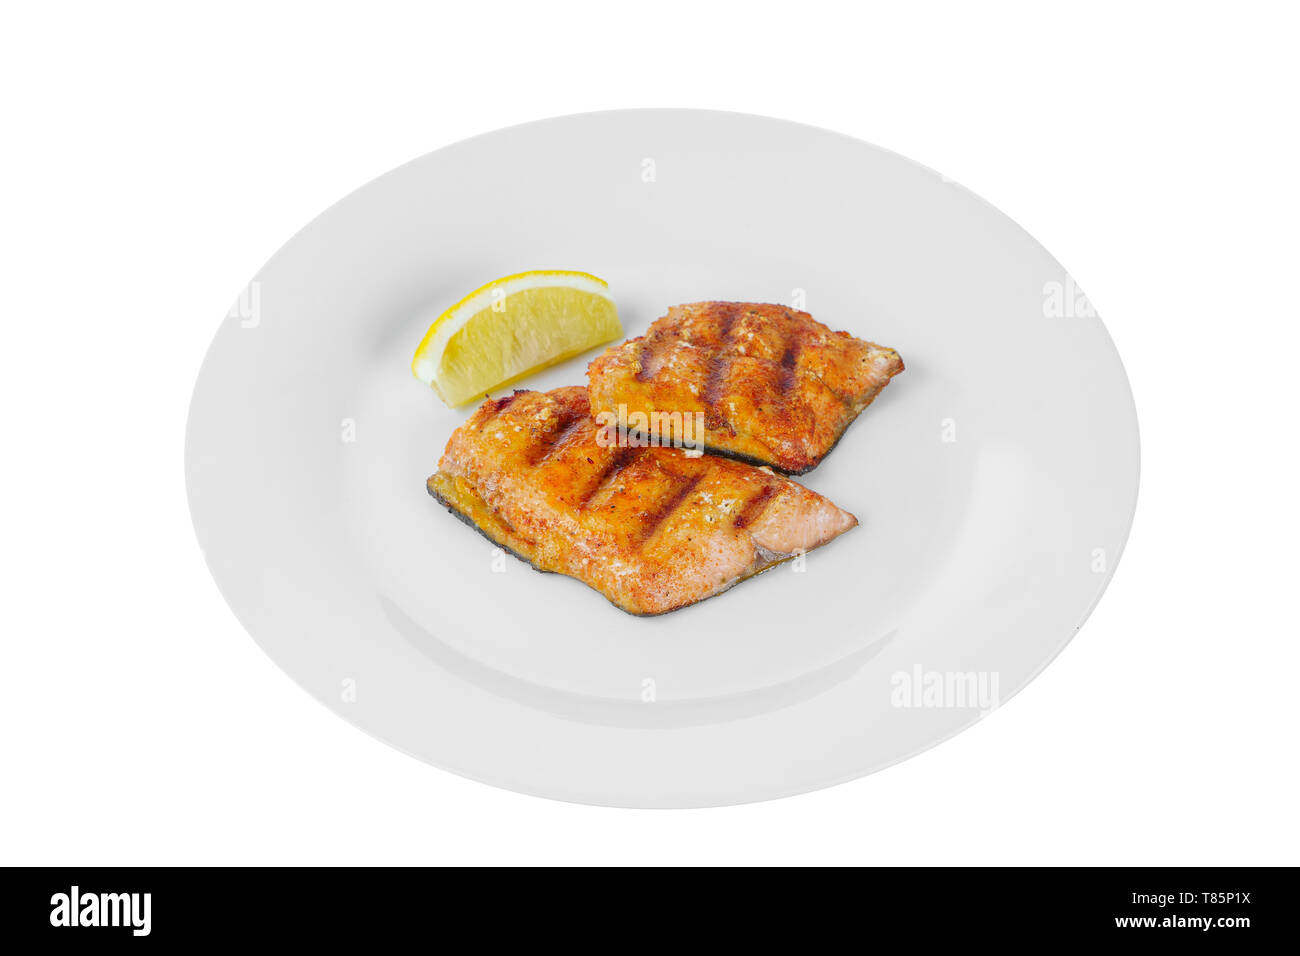 https://c8.alamy.com/comp/T85P1X/fish-trout-keta-pink-salmon-a-piece-baked-fried-over-an-open-fire-with-a-slice-of-lemon-appetizing-on-white-isolated-background-side-view-T85P1X.jpg